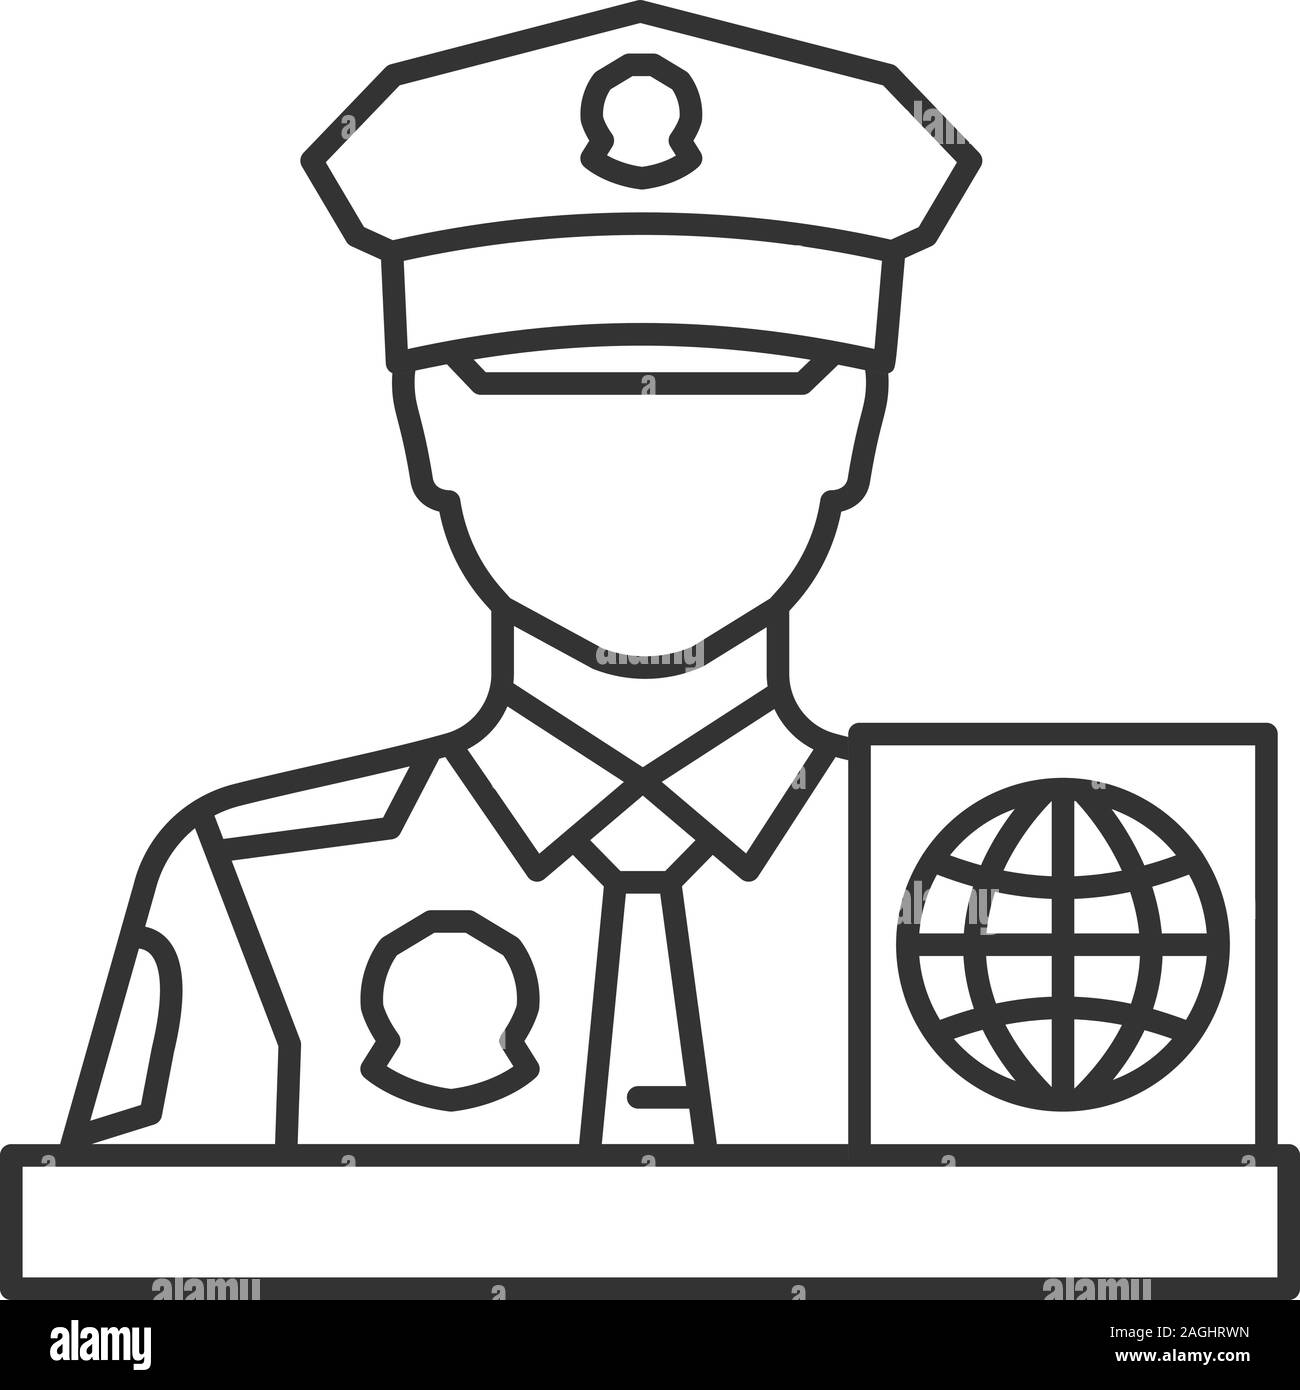 Passport control officer linear icon. Thin line illustration. Border protection service. Contour symbol. Vector isolated outline drawing Stock Vector